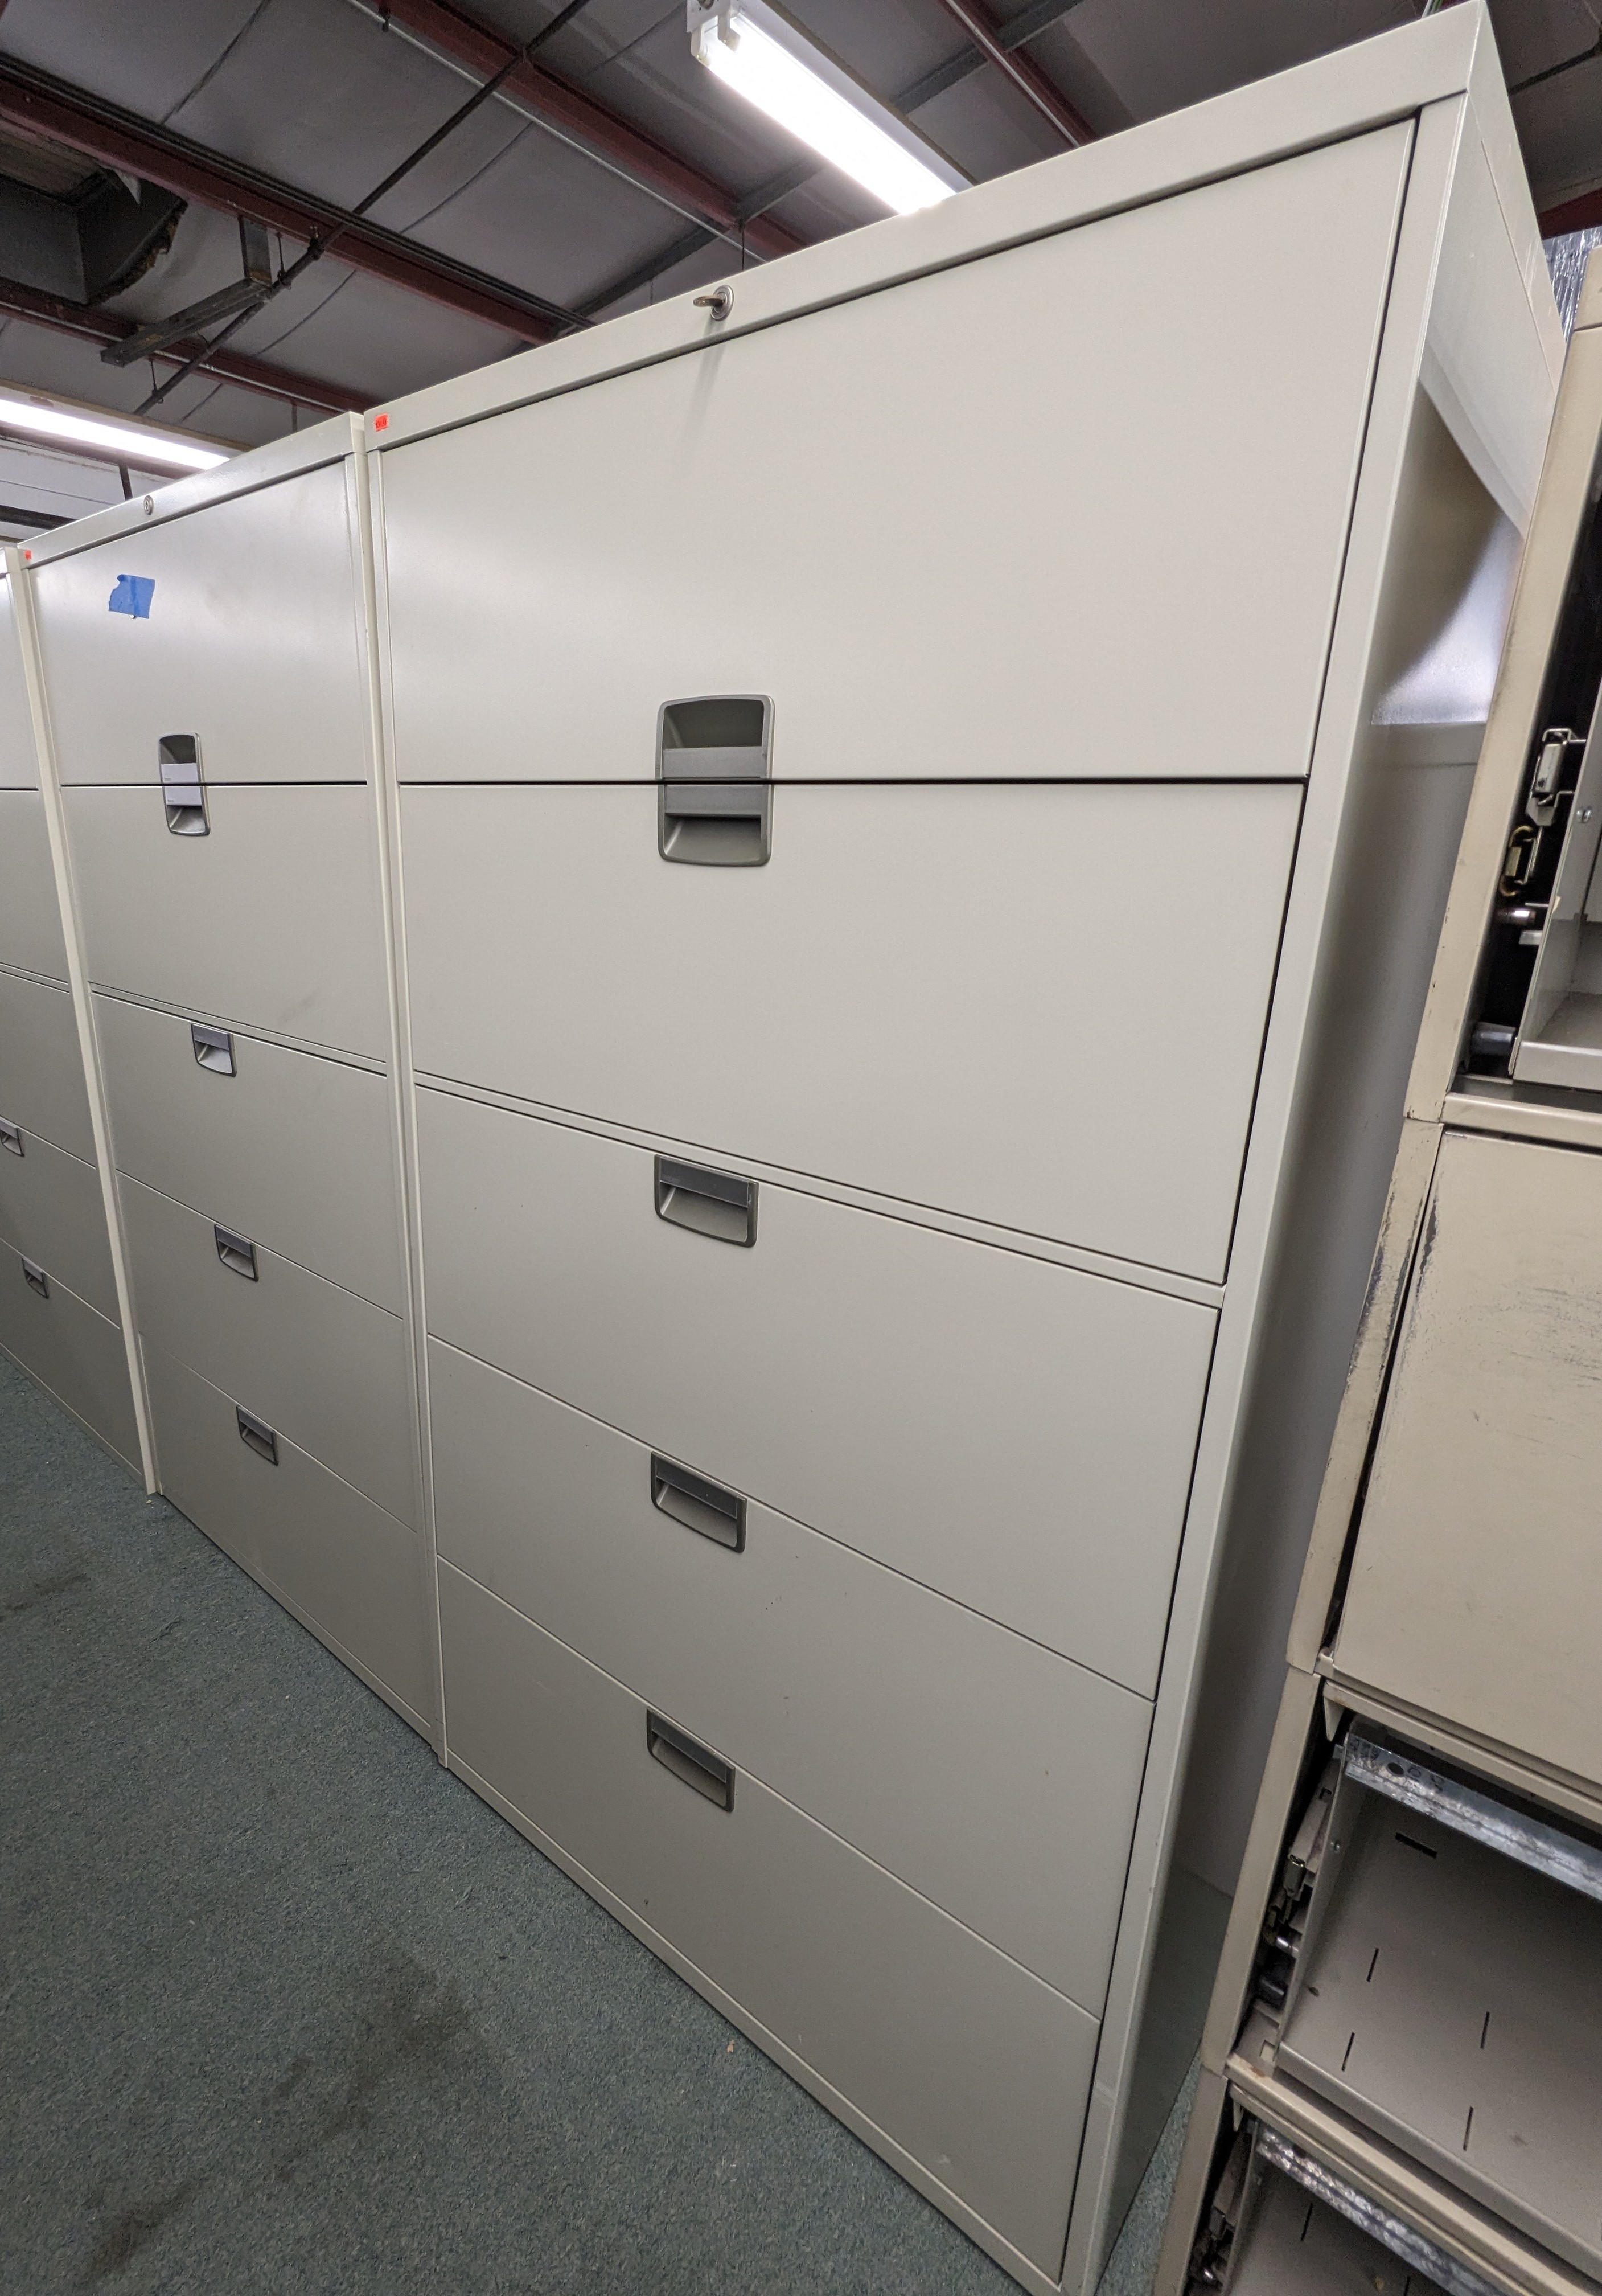 Used Turnstone 5 Drawer Lateral File, Tan